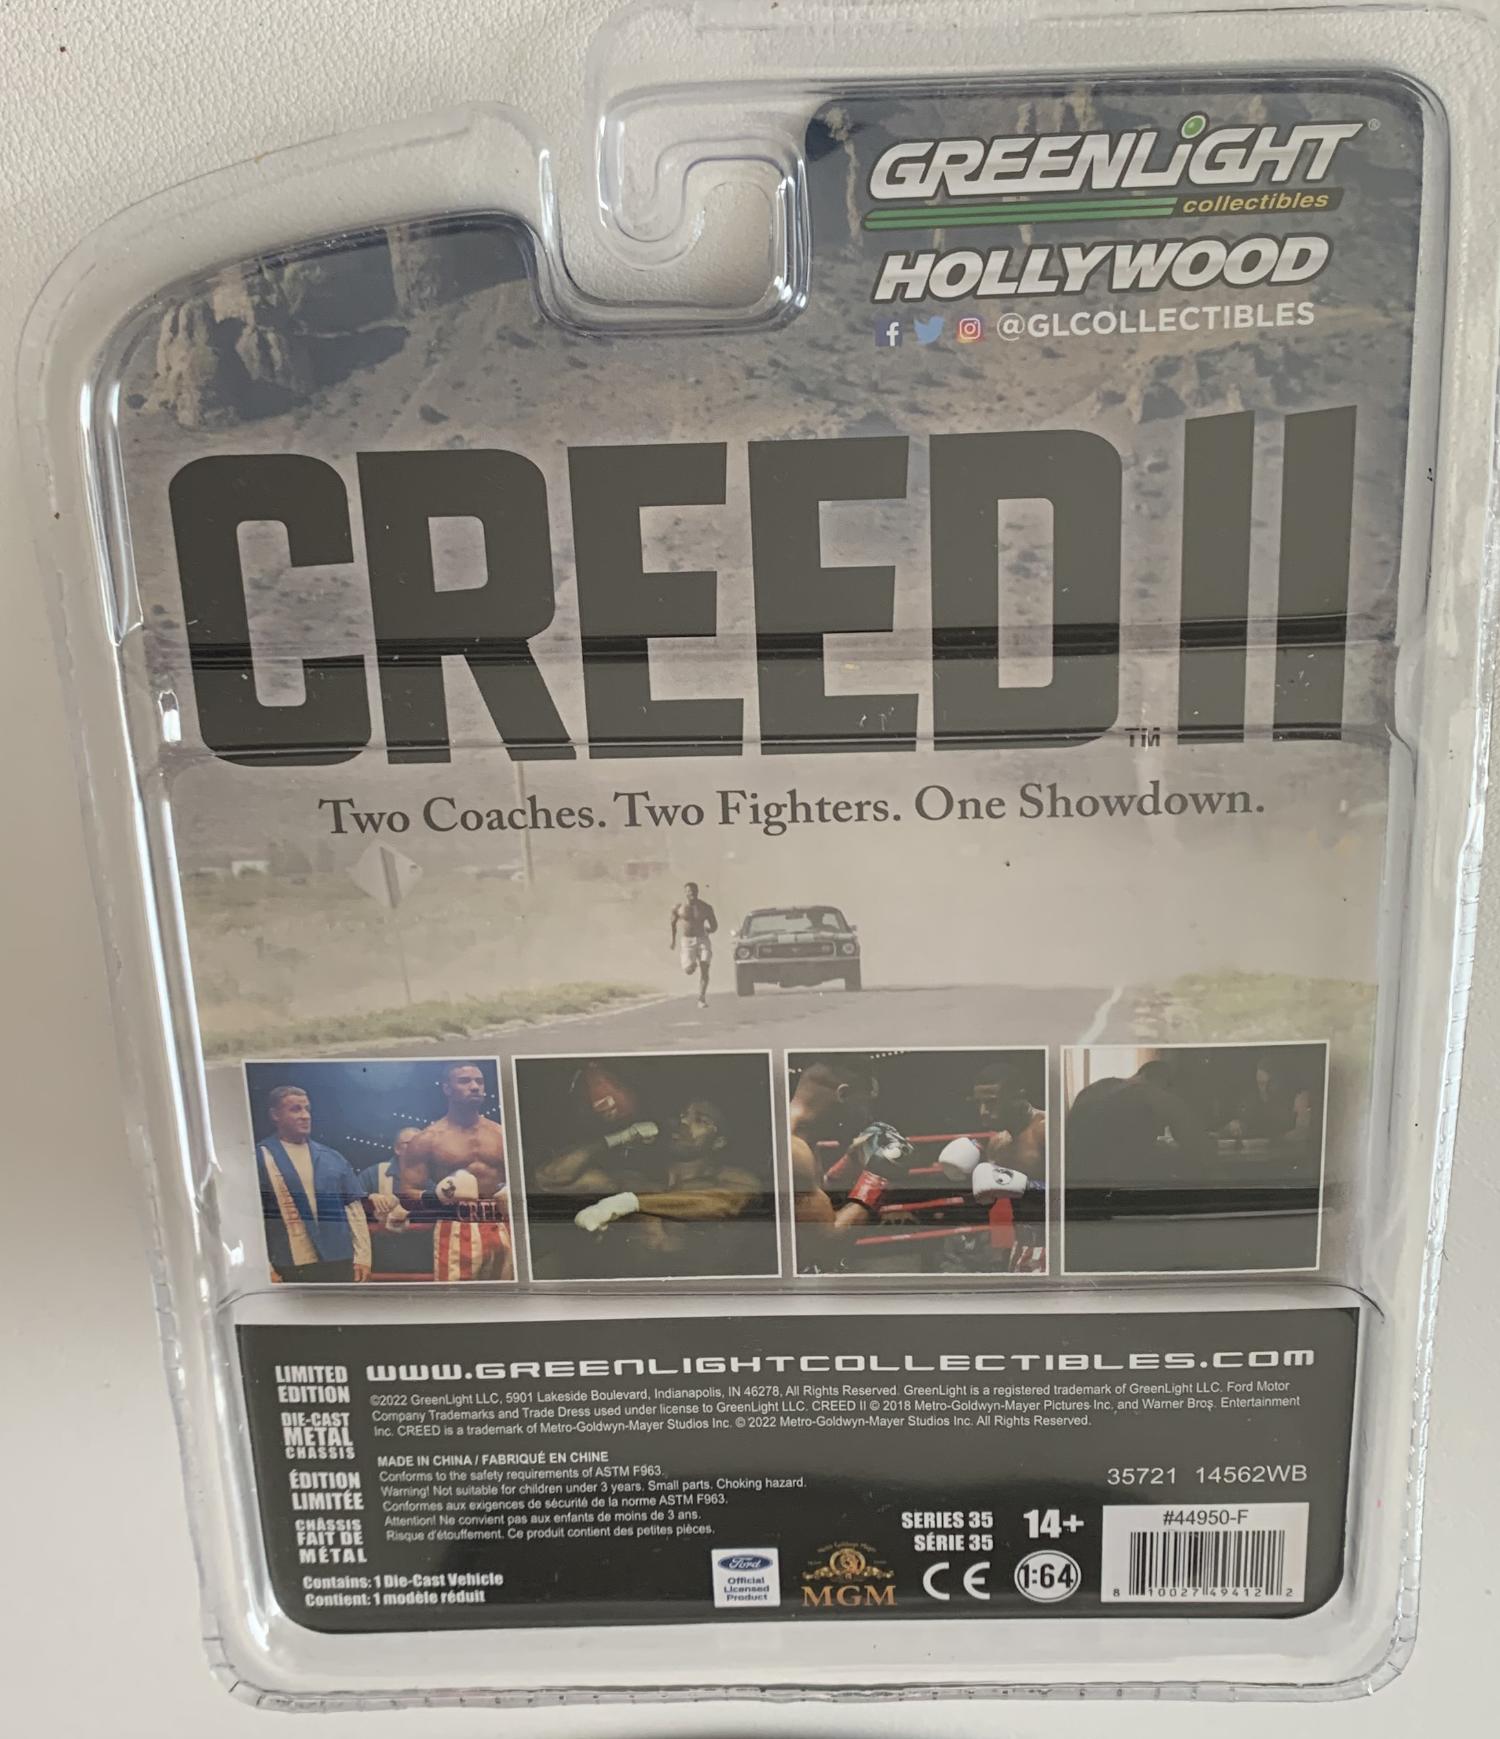 Model is presented in blister packaging in Creed II themed boxed packaging.  Limited Edition model with number on base of the car